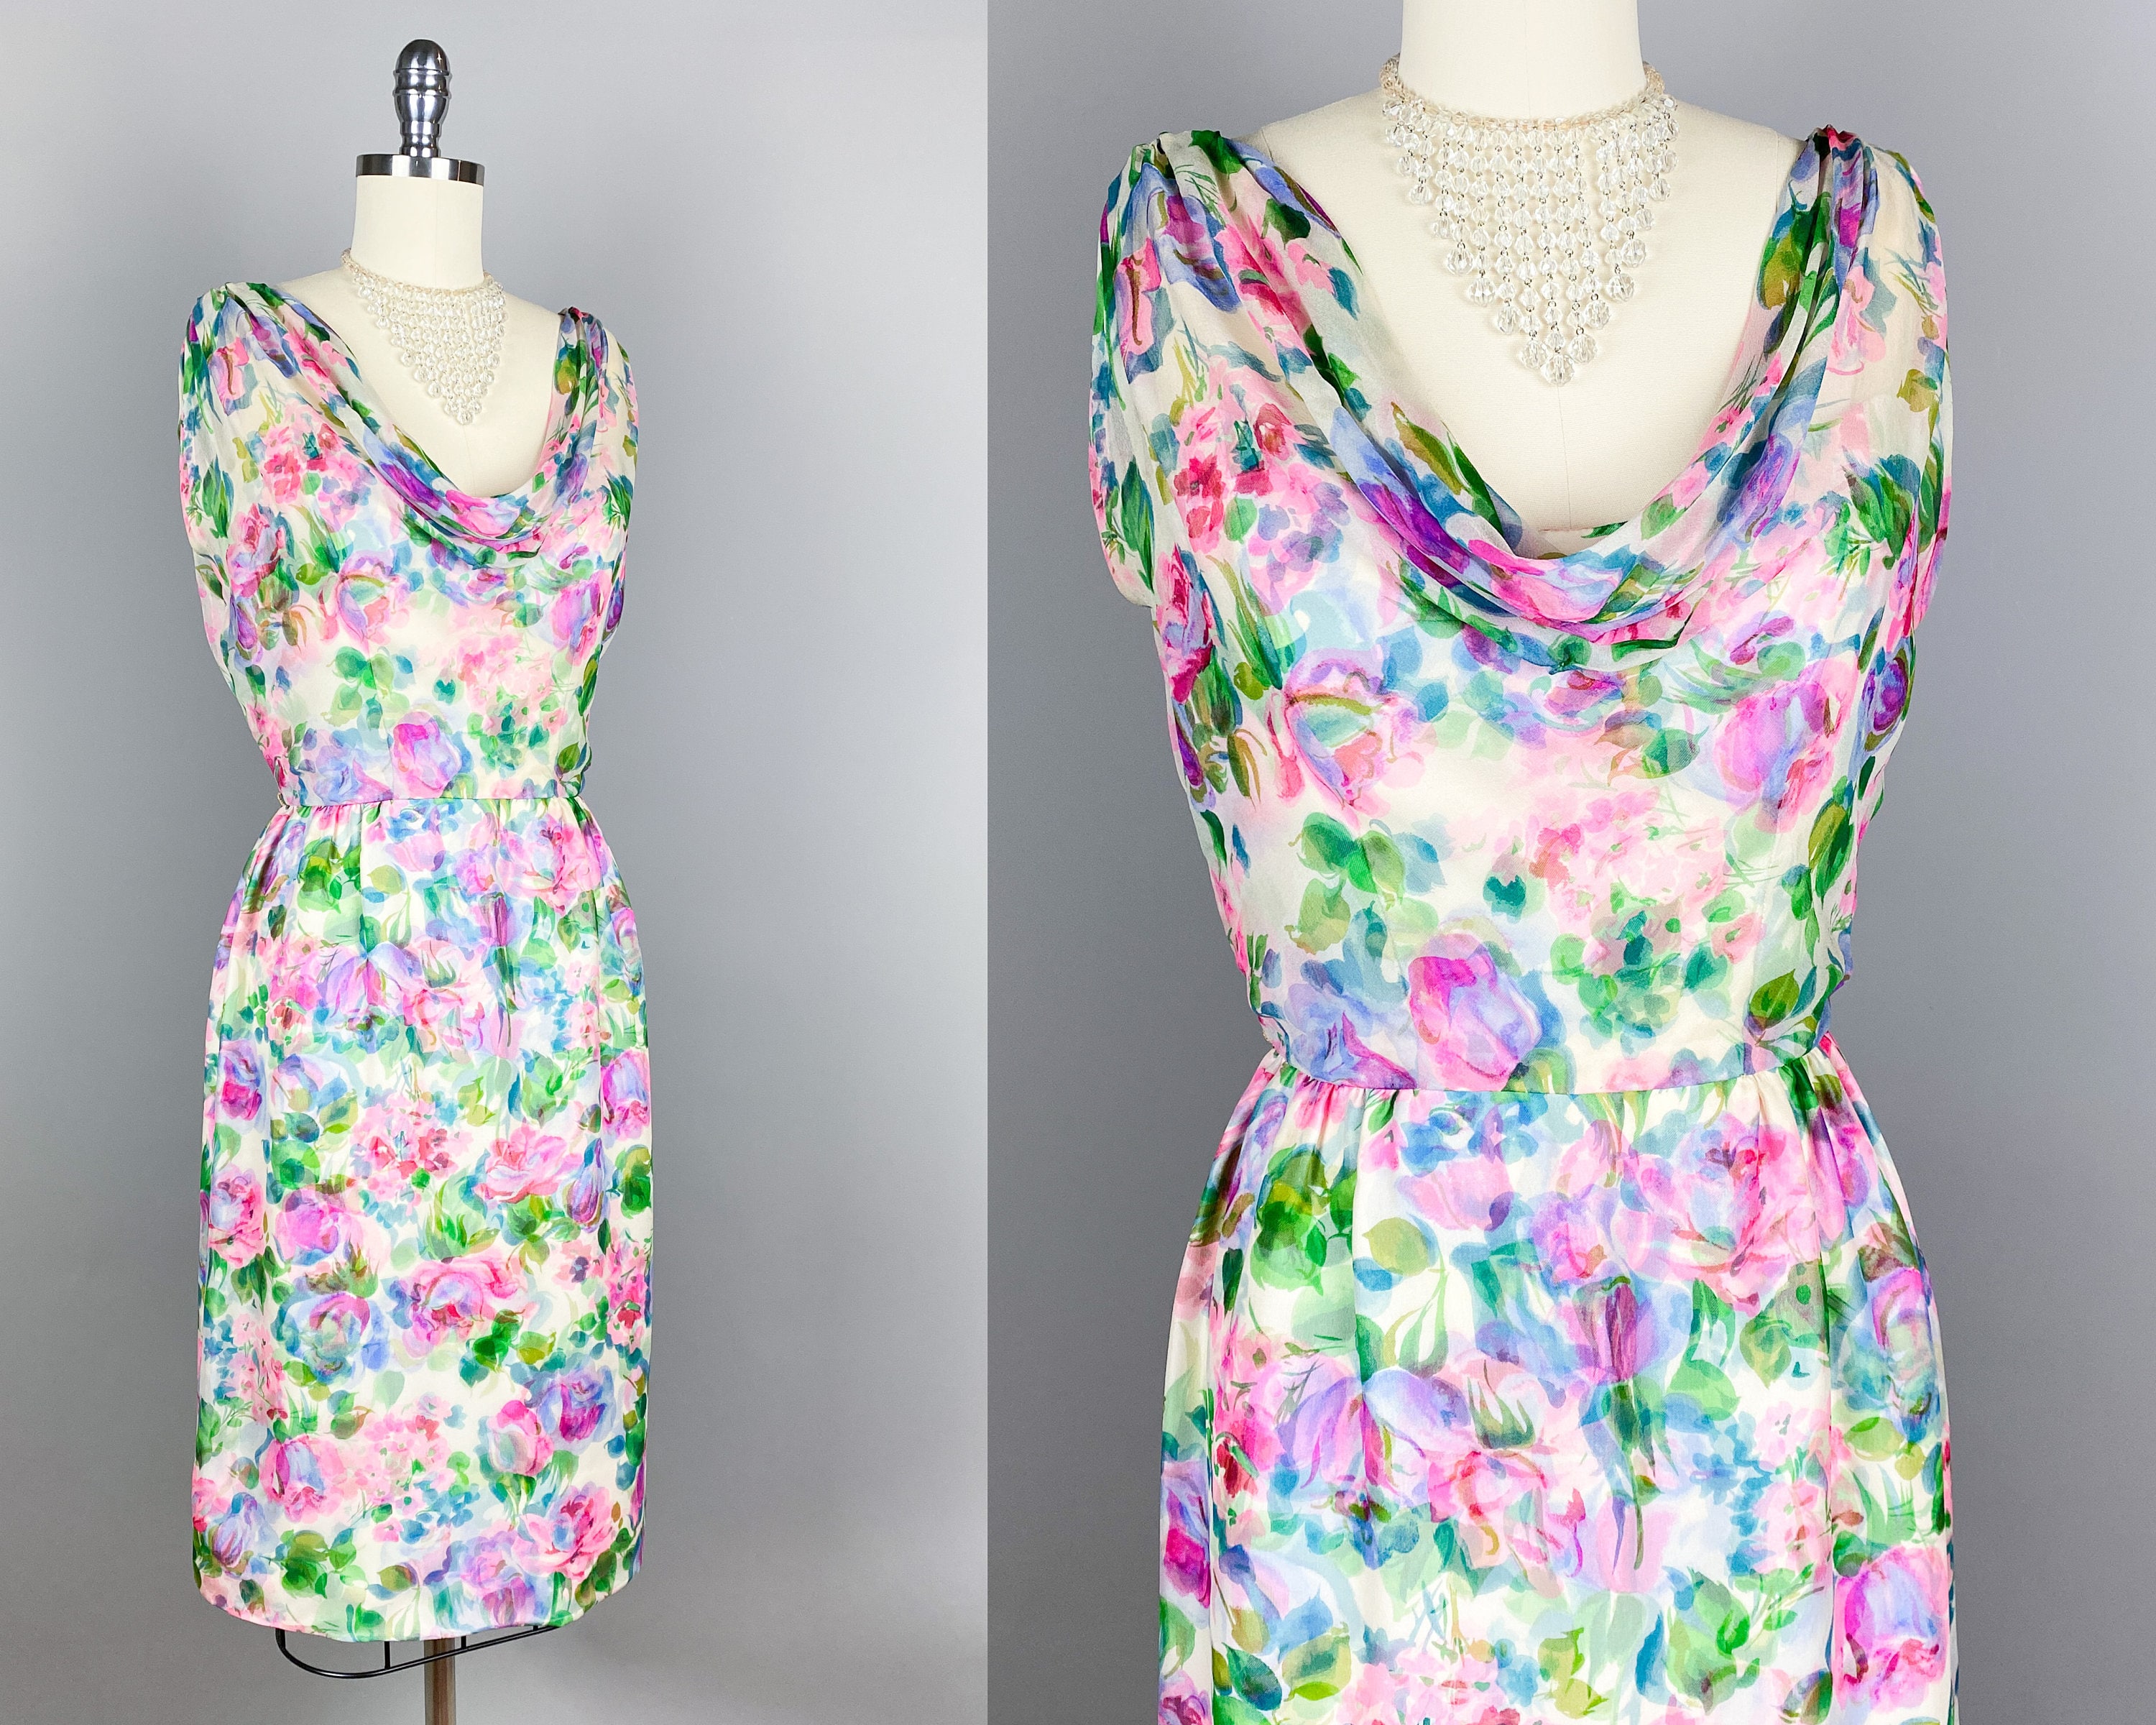 Vintage 1960s Dress by Malcolm Starr Small 60s Silk Chiffon Watercolor ...